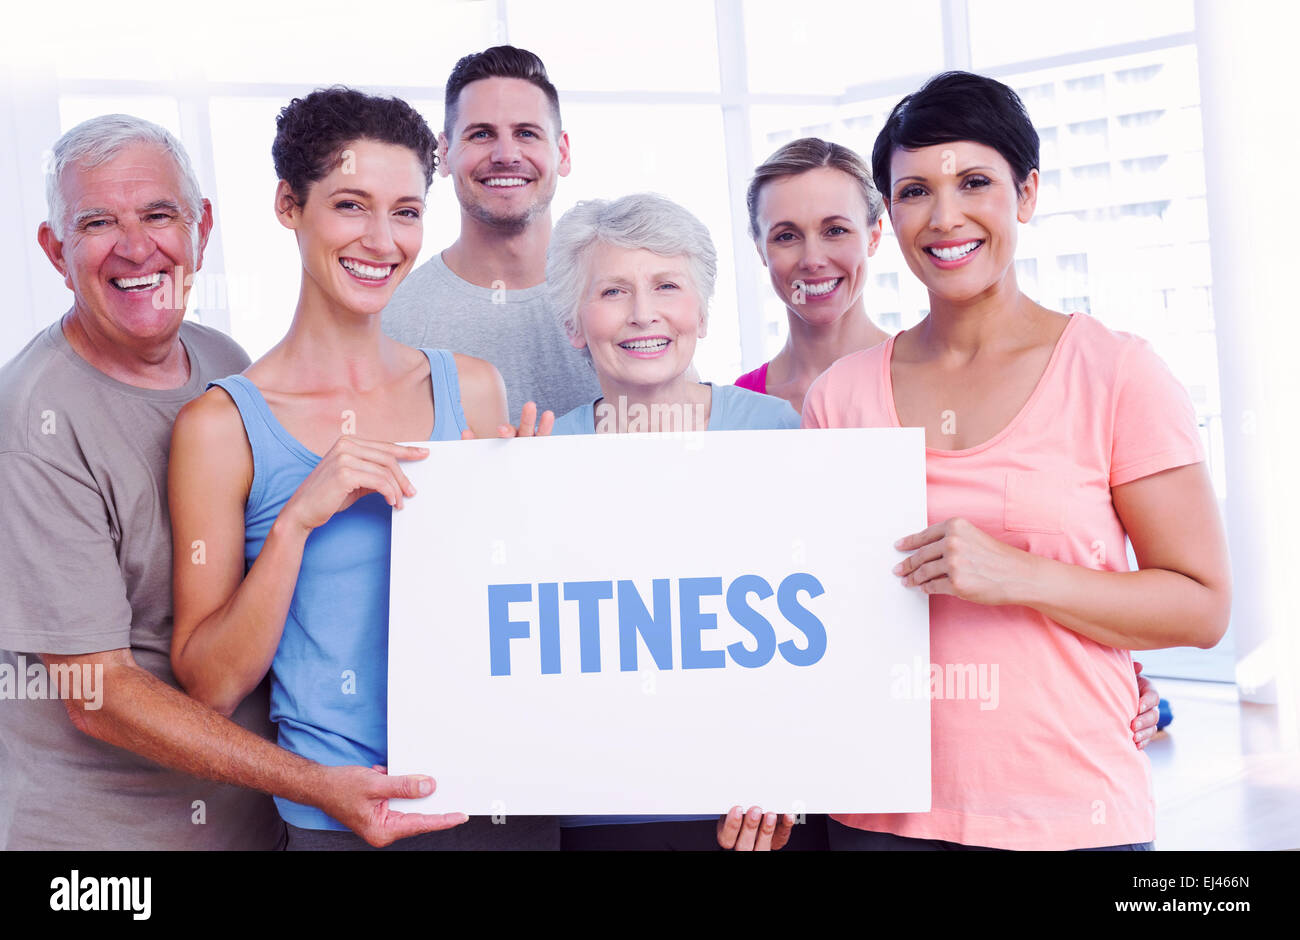 Fitness against fit people holding blank board in yoga class Stock Photo